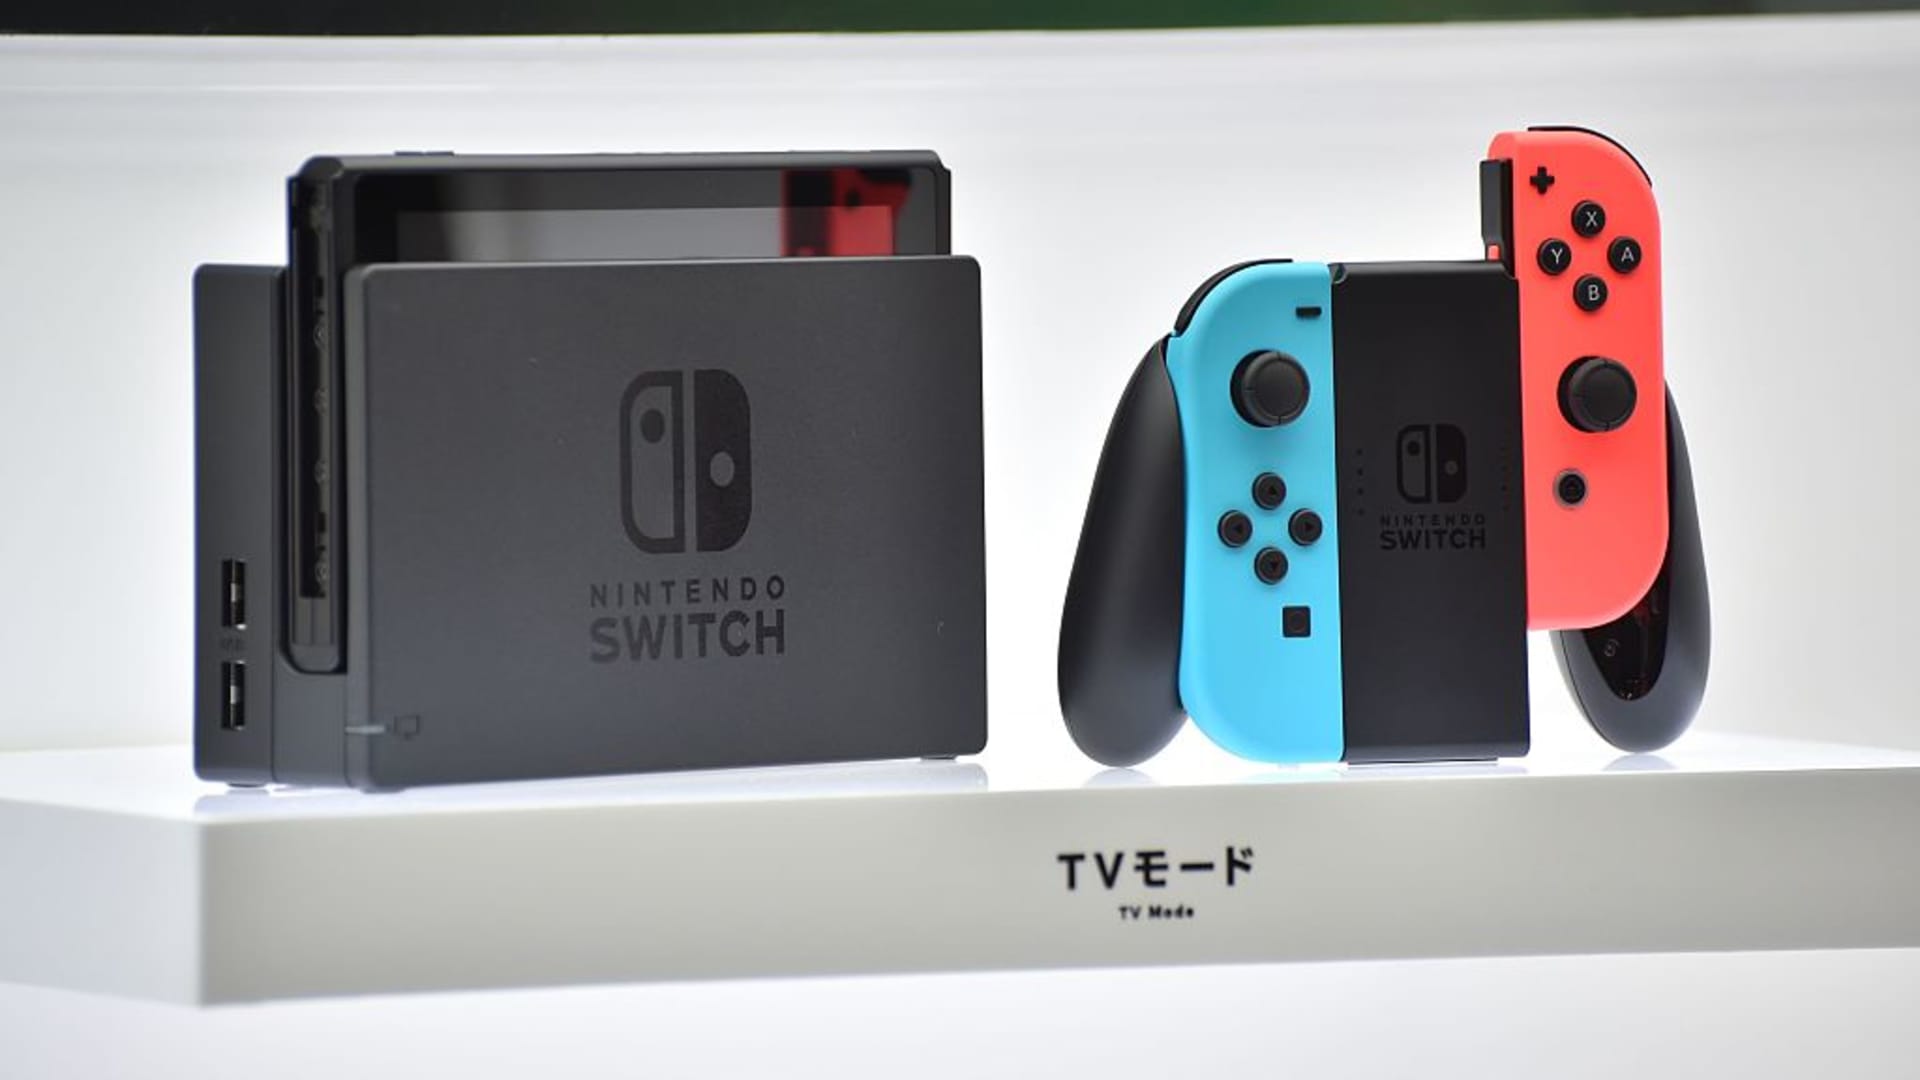 The Nintendo Switch will cost $300 and release worldwide on March 3